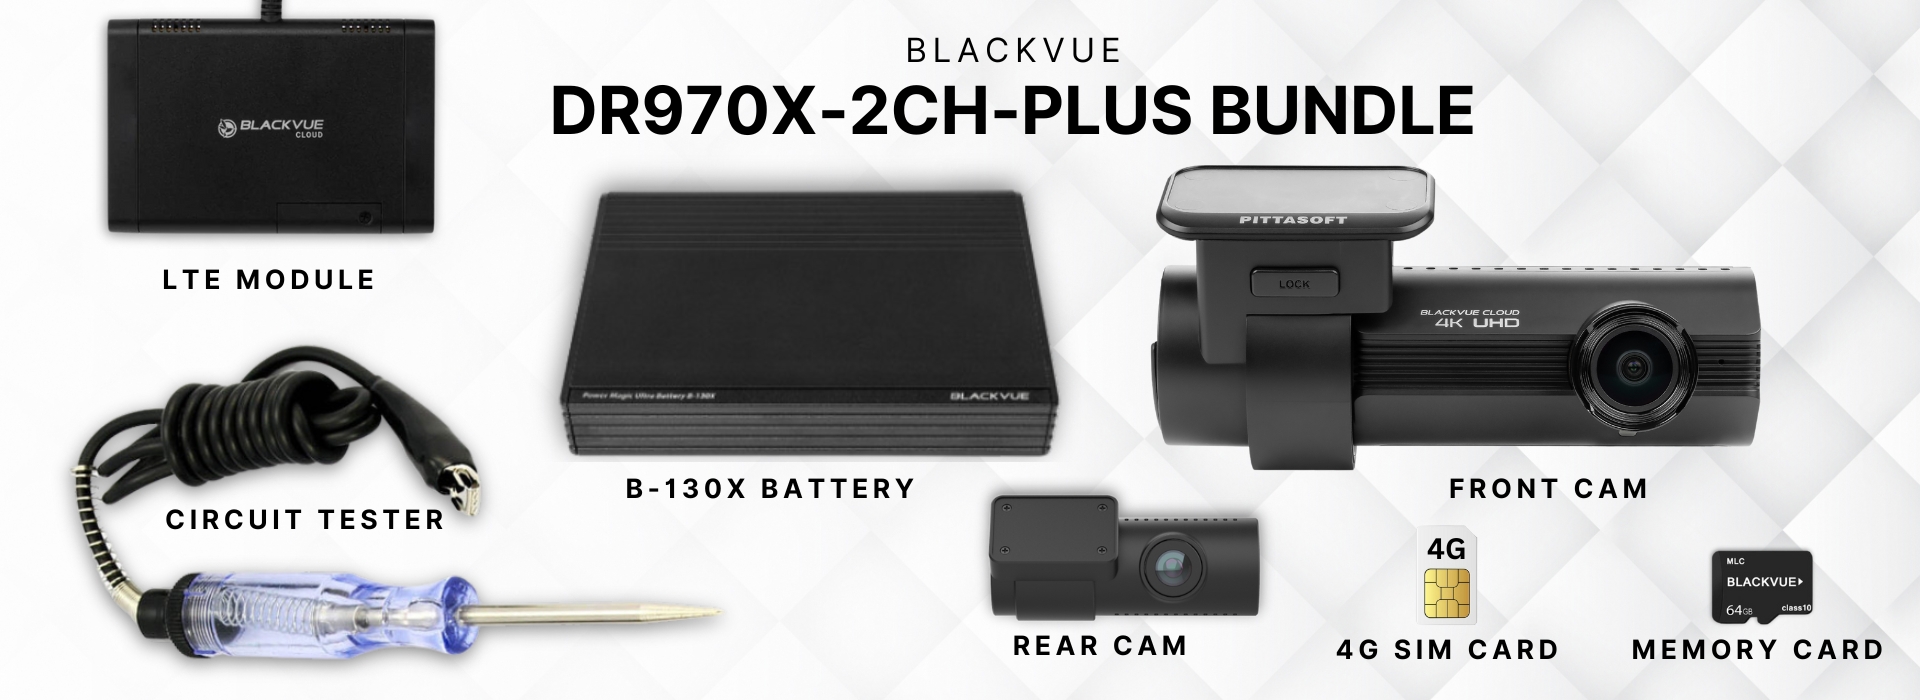 BlackVue DR970X-2CH-PLUS Bundle | Everything You Need For Ultimate Protection banner